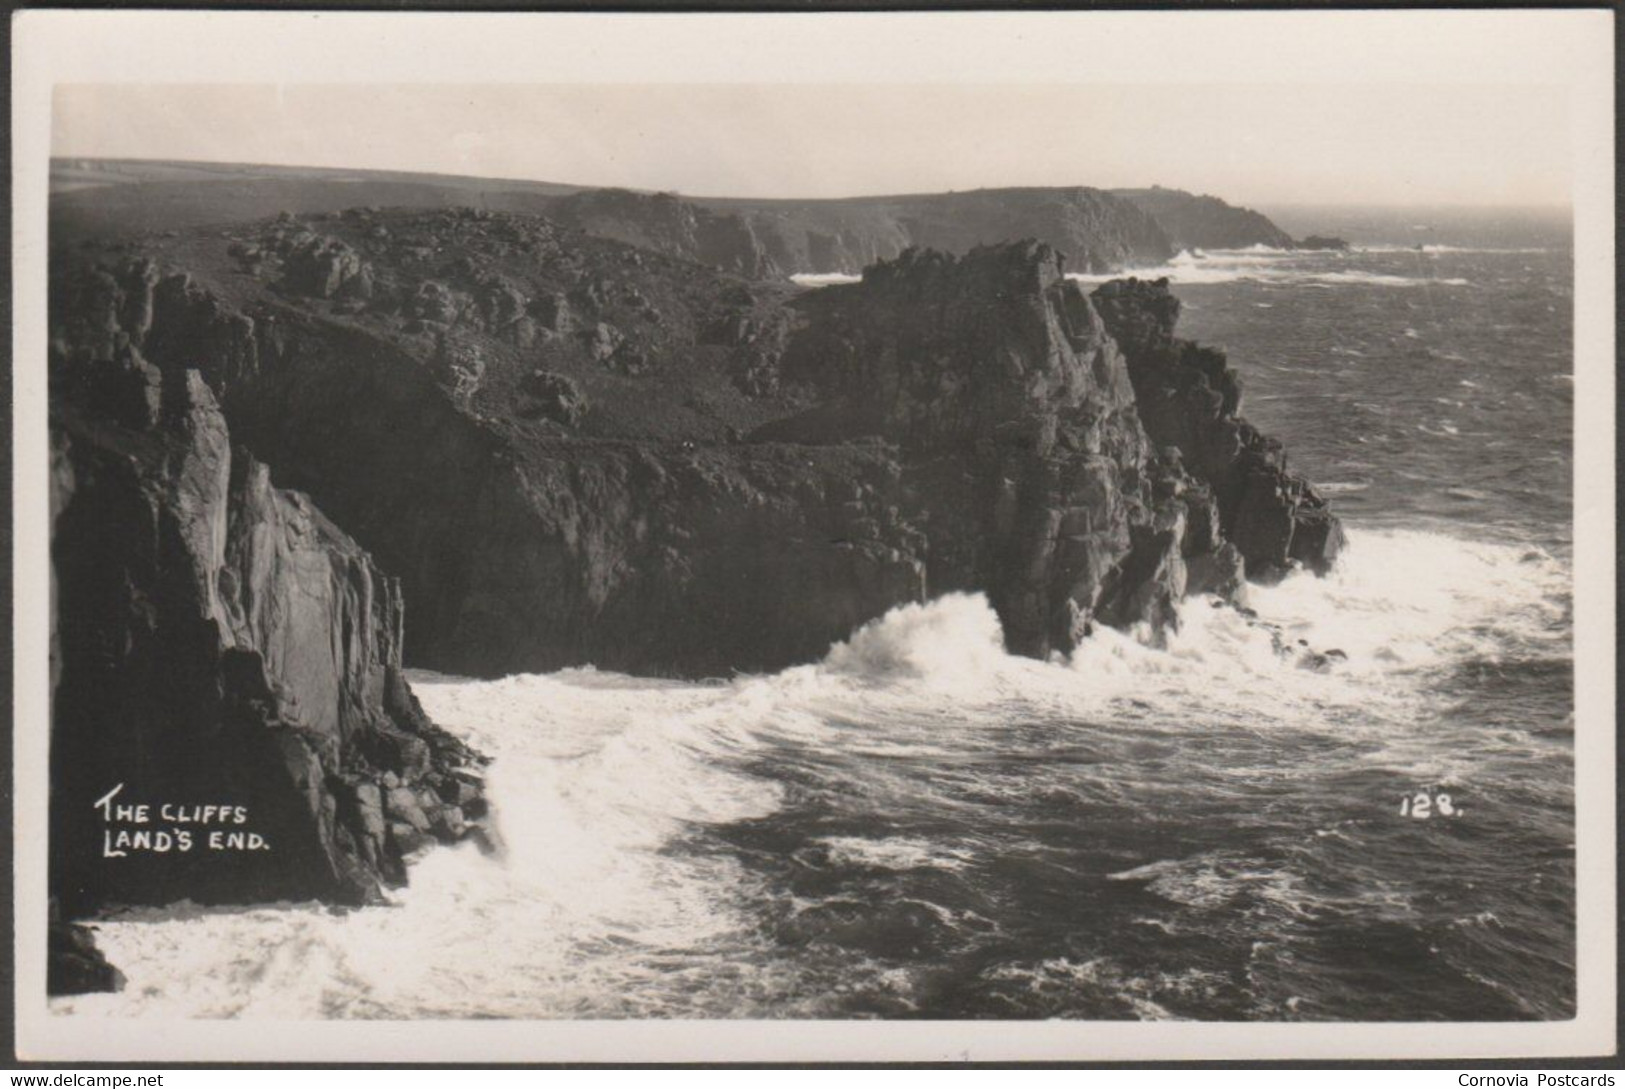 The Cliffs, Land's End, Cornwall, C.1940s - First & Last House RP Postcard - Land's End